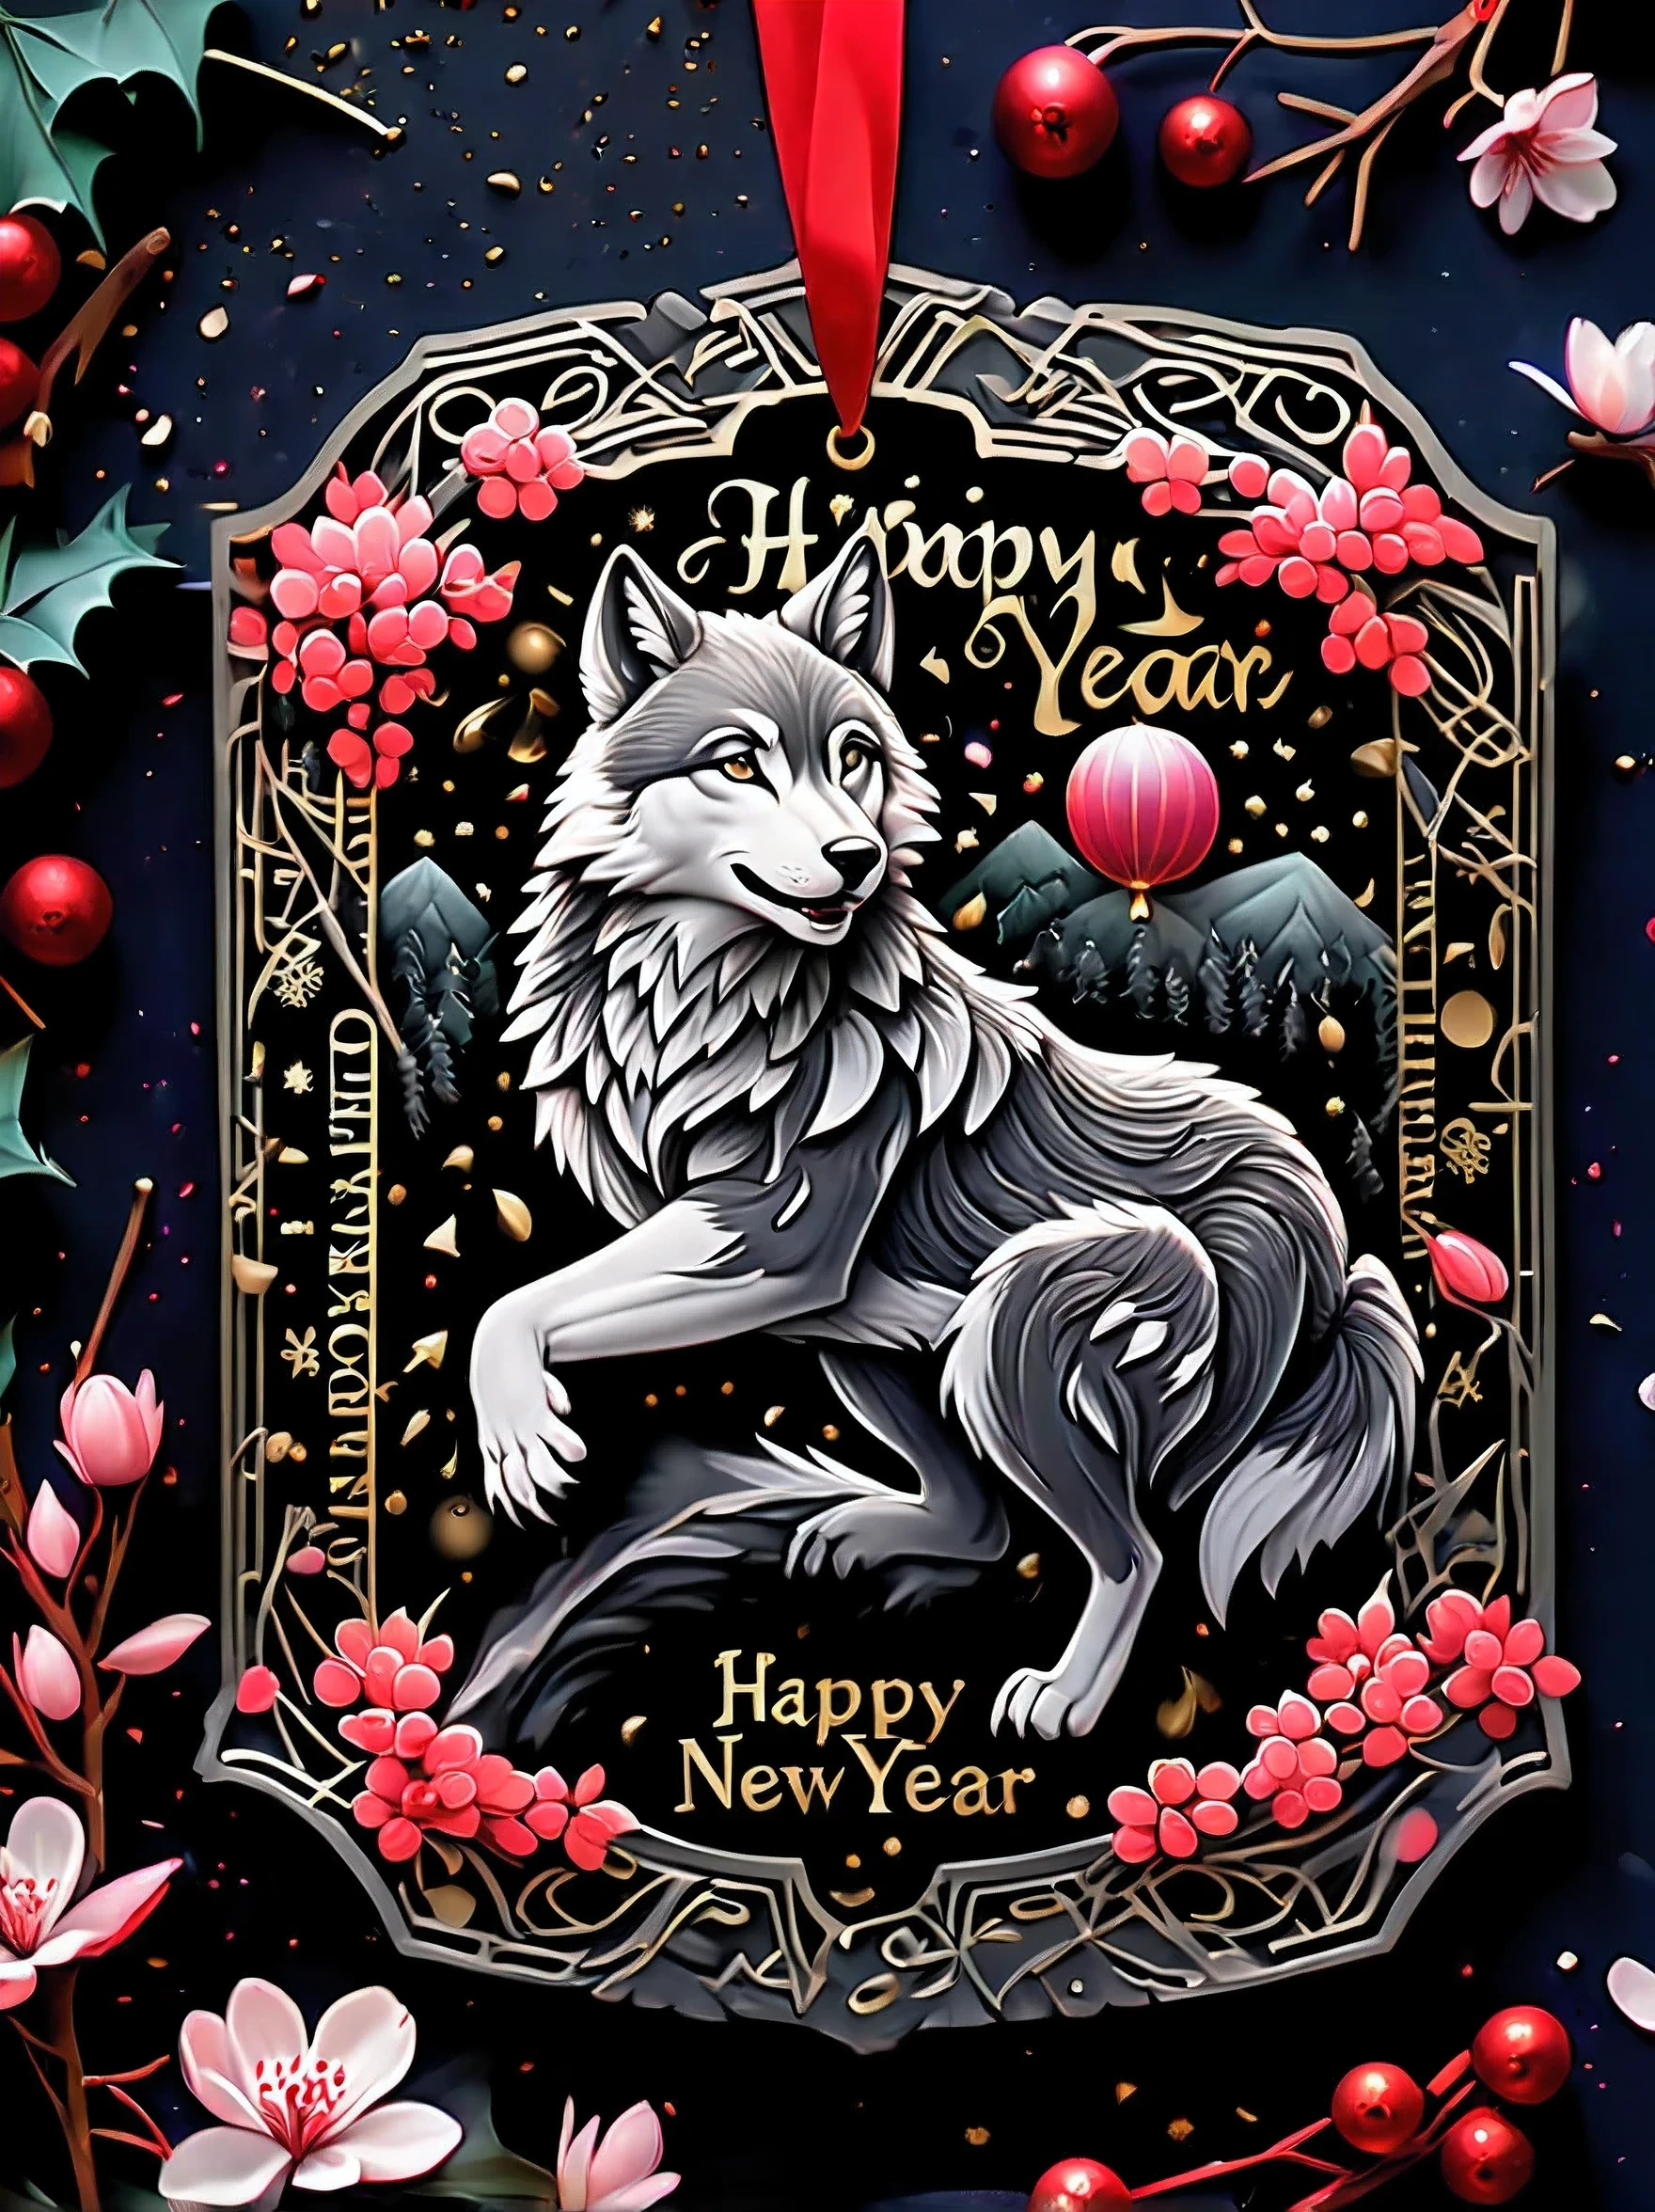 Gouache illustrated gel, wolf with stunning gray fur, The word "Happy New Year" on a black metal plate, insane draw, dark fantasy atmosphere, intricate detailes, Beautiful texture, masutepiece, inky, Red, white, master stroke, airbrushed, Around the fusion of cherry blossom blizzard and snow, Beauty under brush background details, fighting spirit, Fighting instinct, become extremely emotional,(((About New Year decoration scroll illustration:1.3))), (((About scrolling and drawing Happy New Year:1.3))), insane draw, dark fantasy atmosphere, intricate detailes, Beautiful texture, masutepiece, inky, Red, white, master stroke, (((Masterpieces of detail:1.3))), Super Illustration of masutepiece, High contrast, Tonal contrast, cinematic still, Cinematic Angle, Cinematic lighting, Green, Happy atmosphere, (((Dark fantasy aesthetic explosion graffiti background:1.4))),